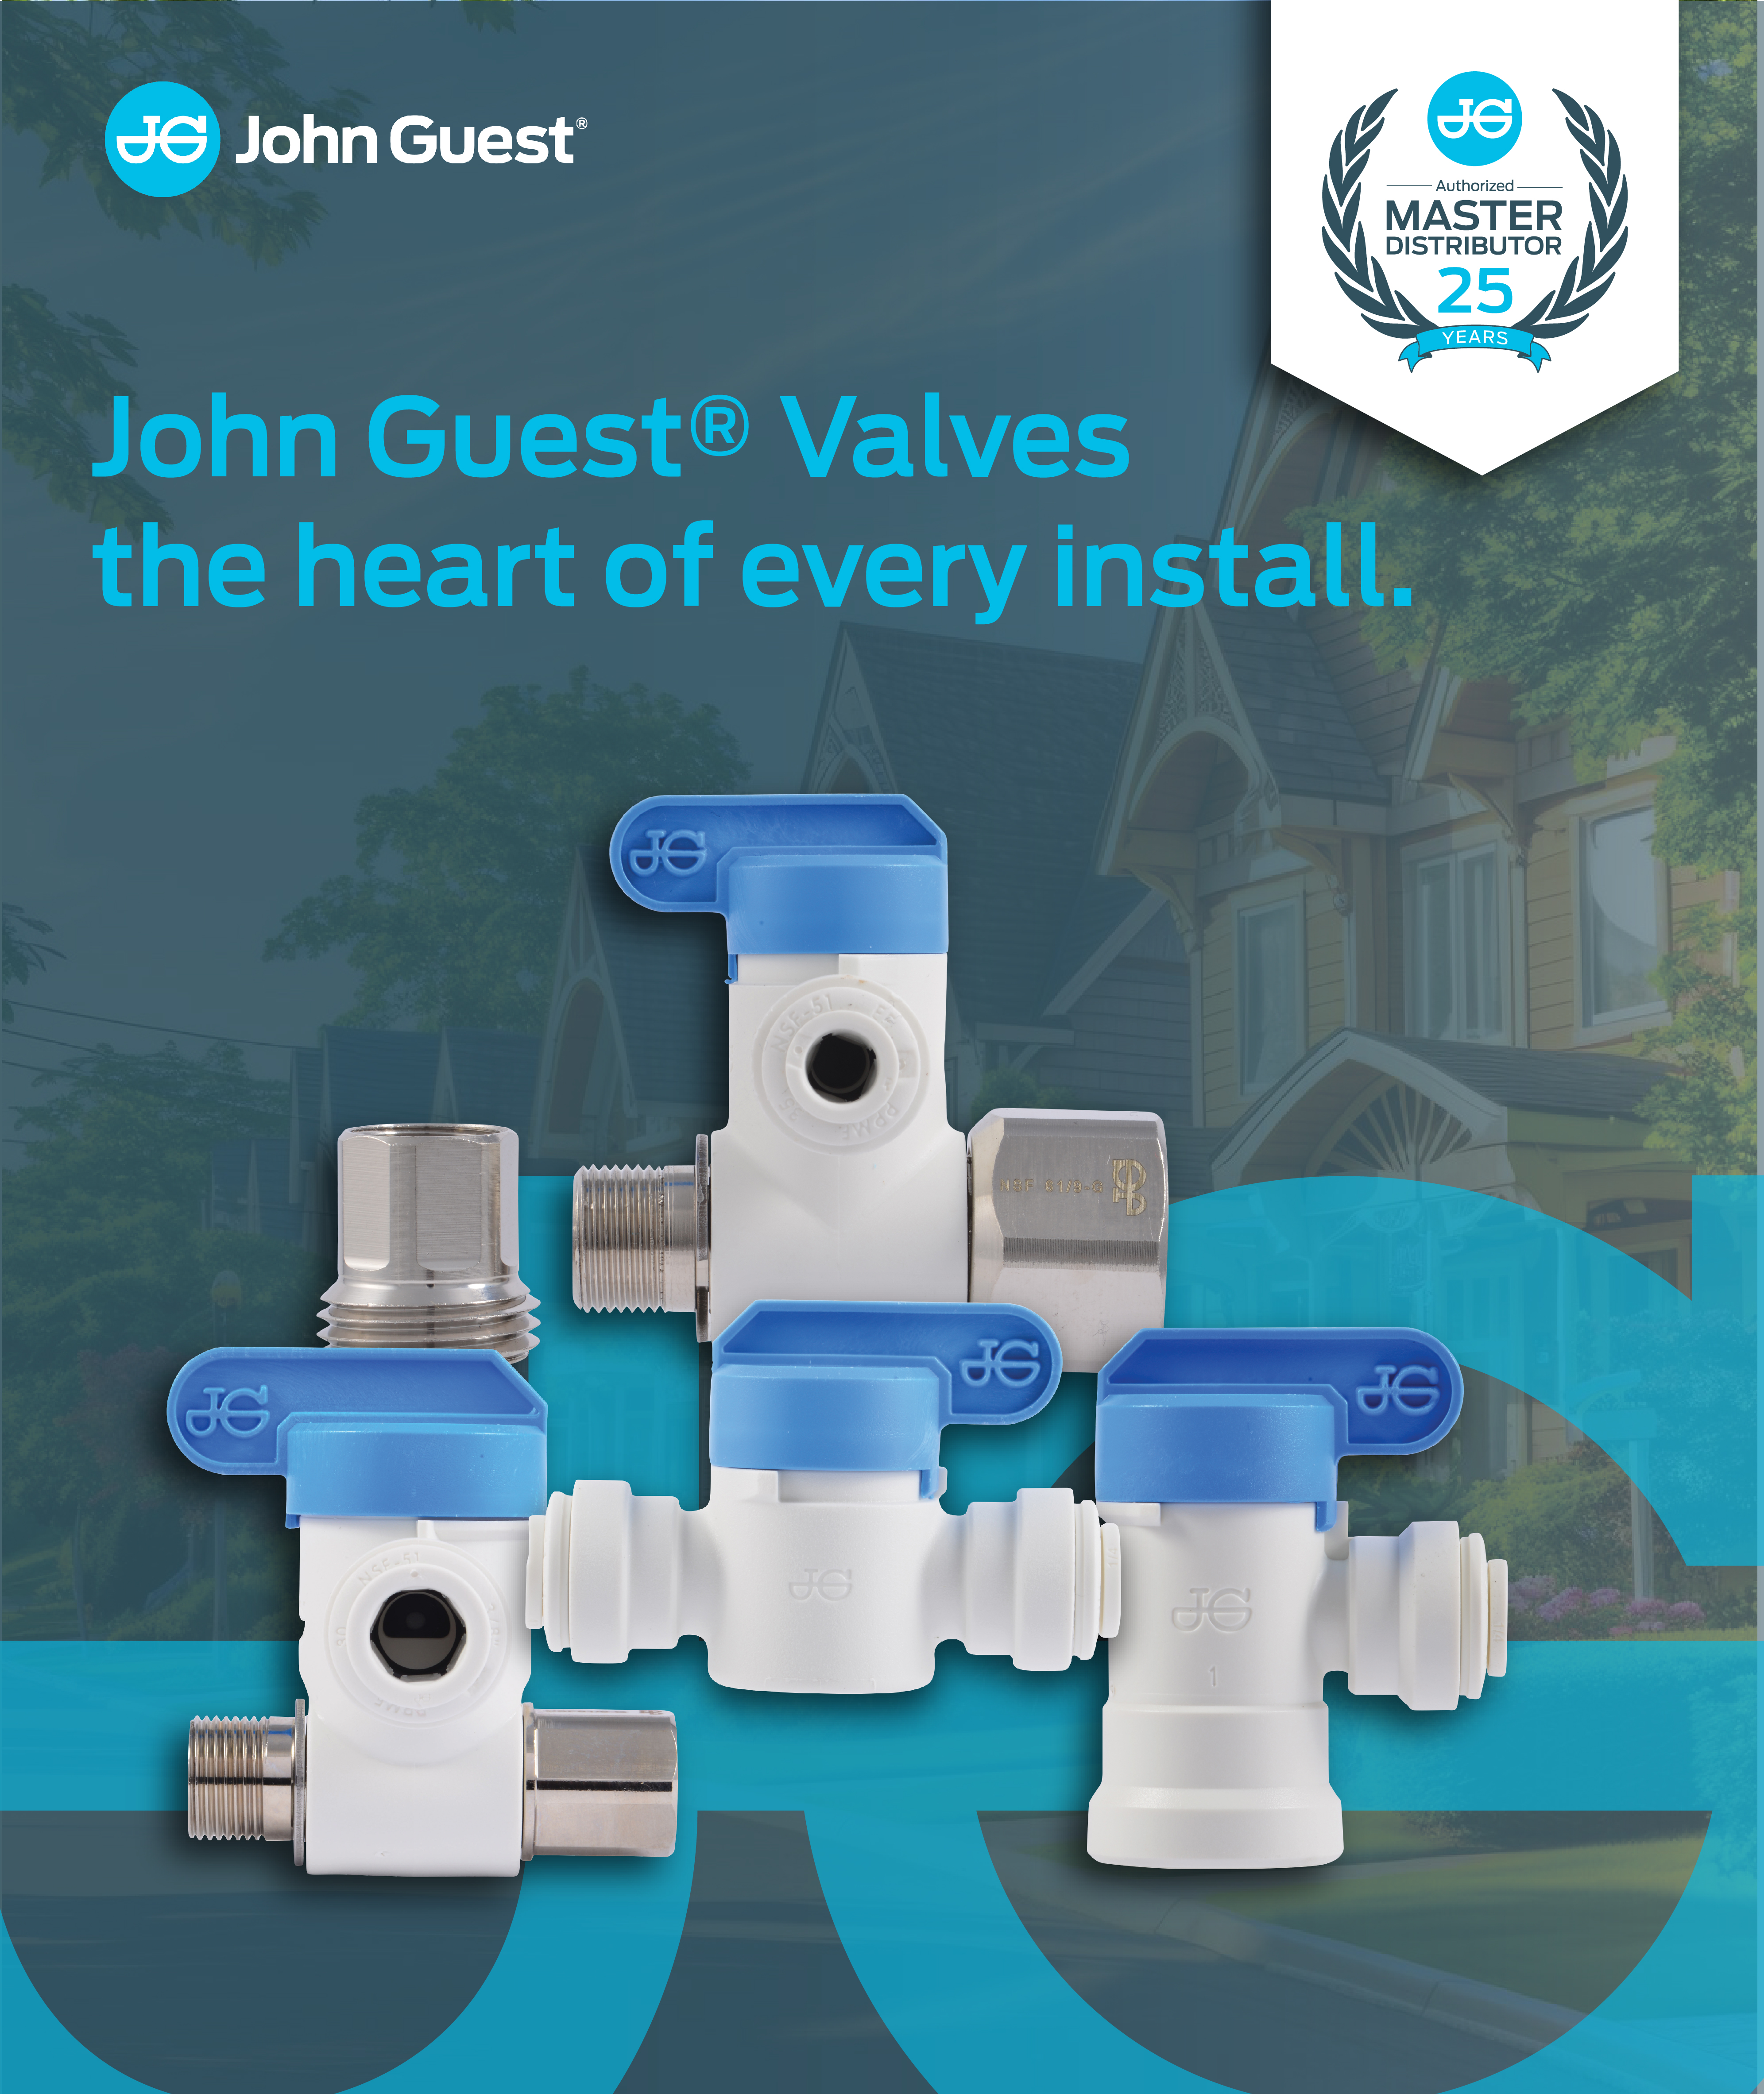 John Guest valves the heart of every install.